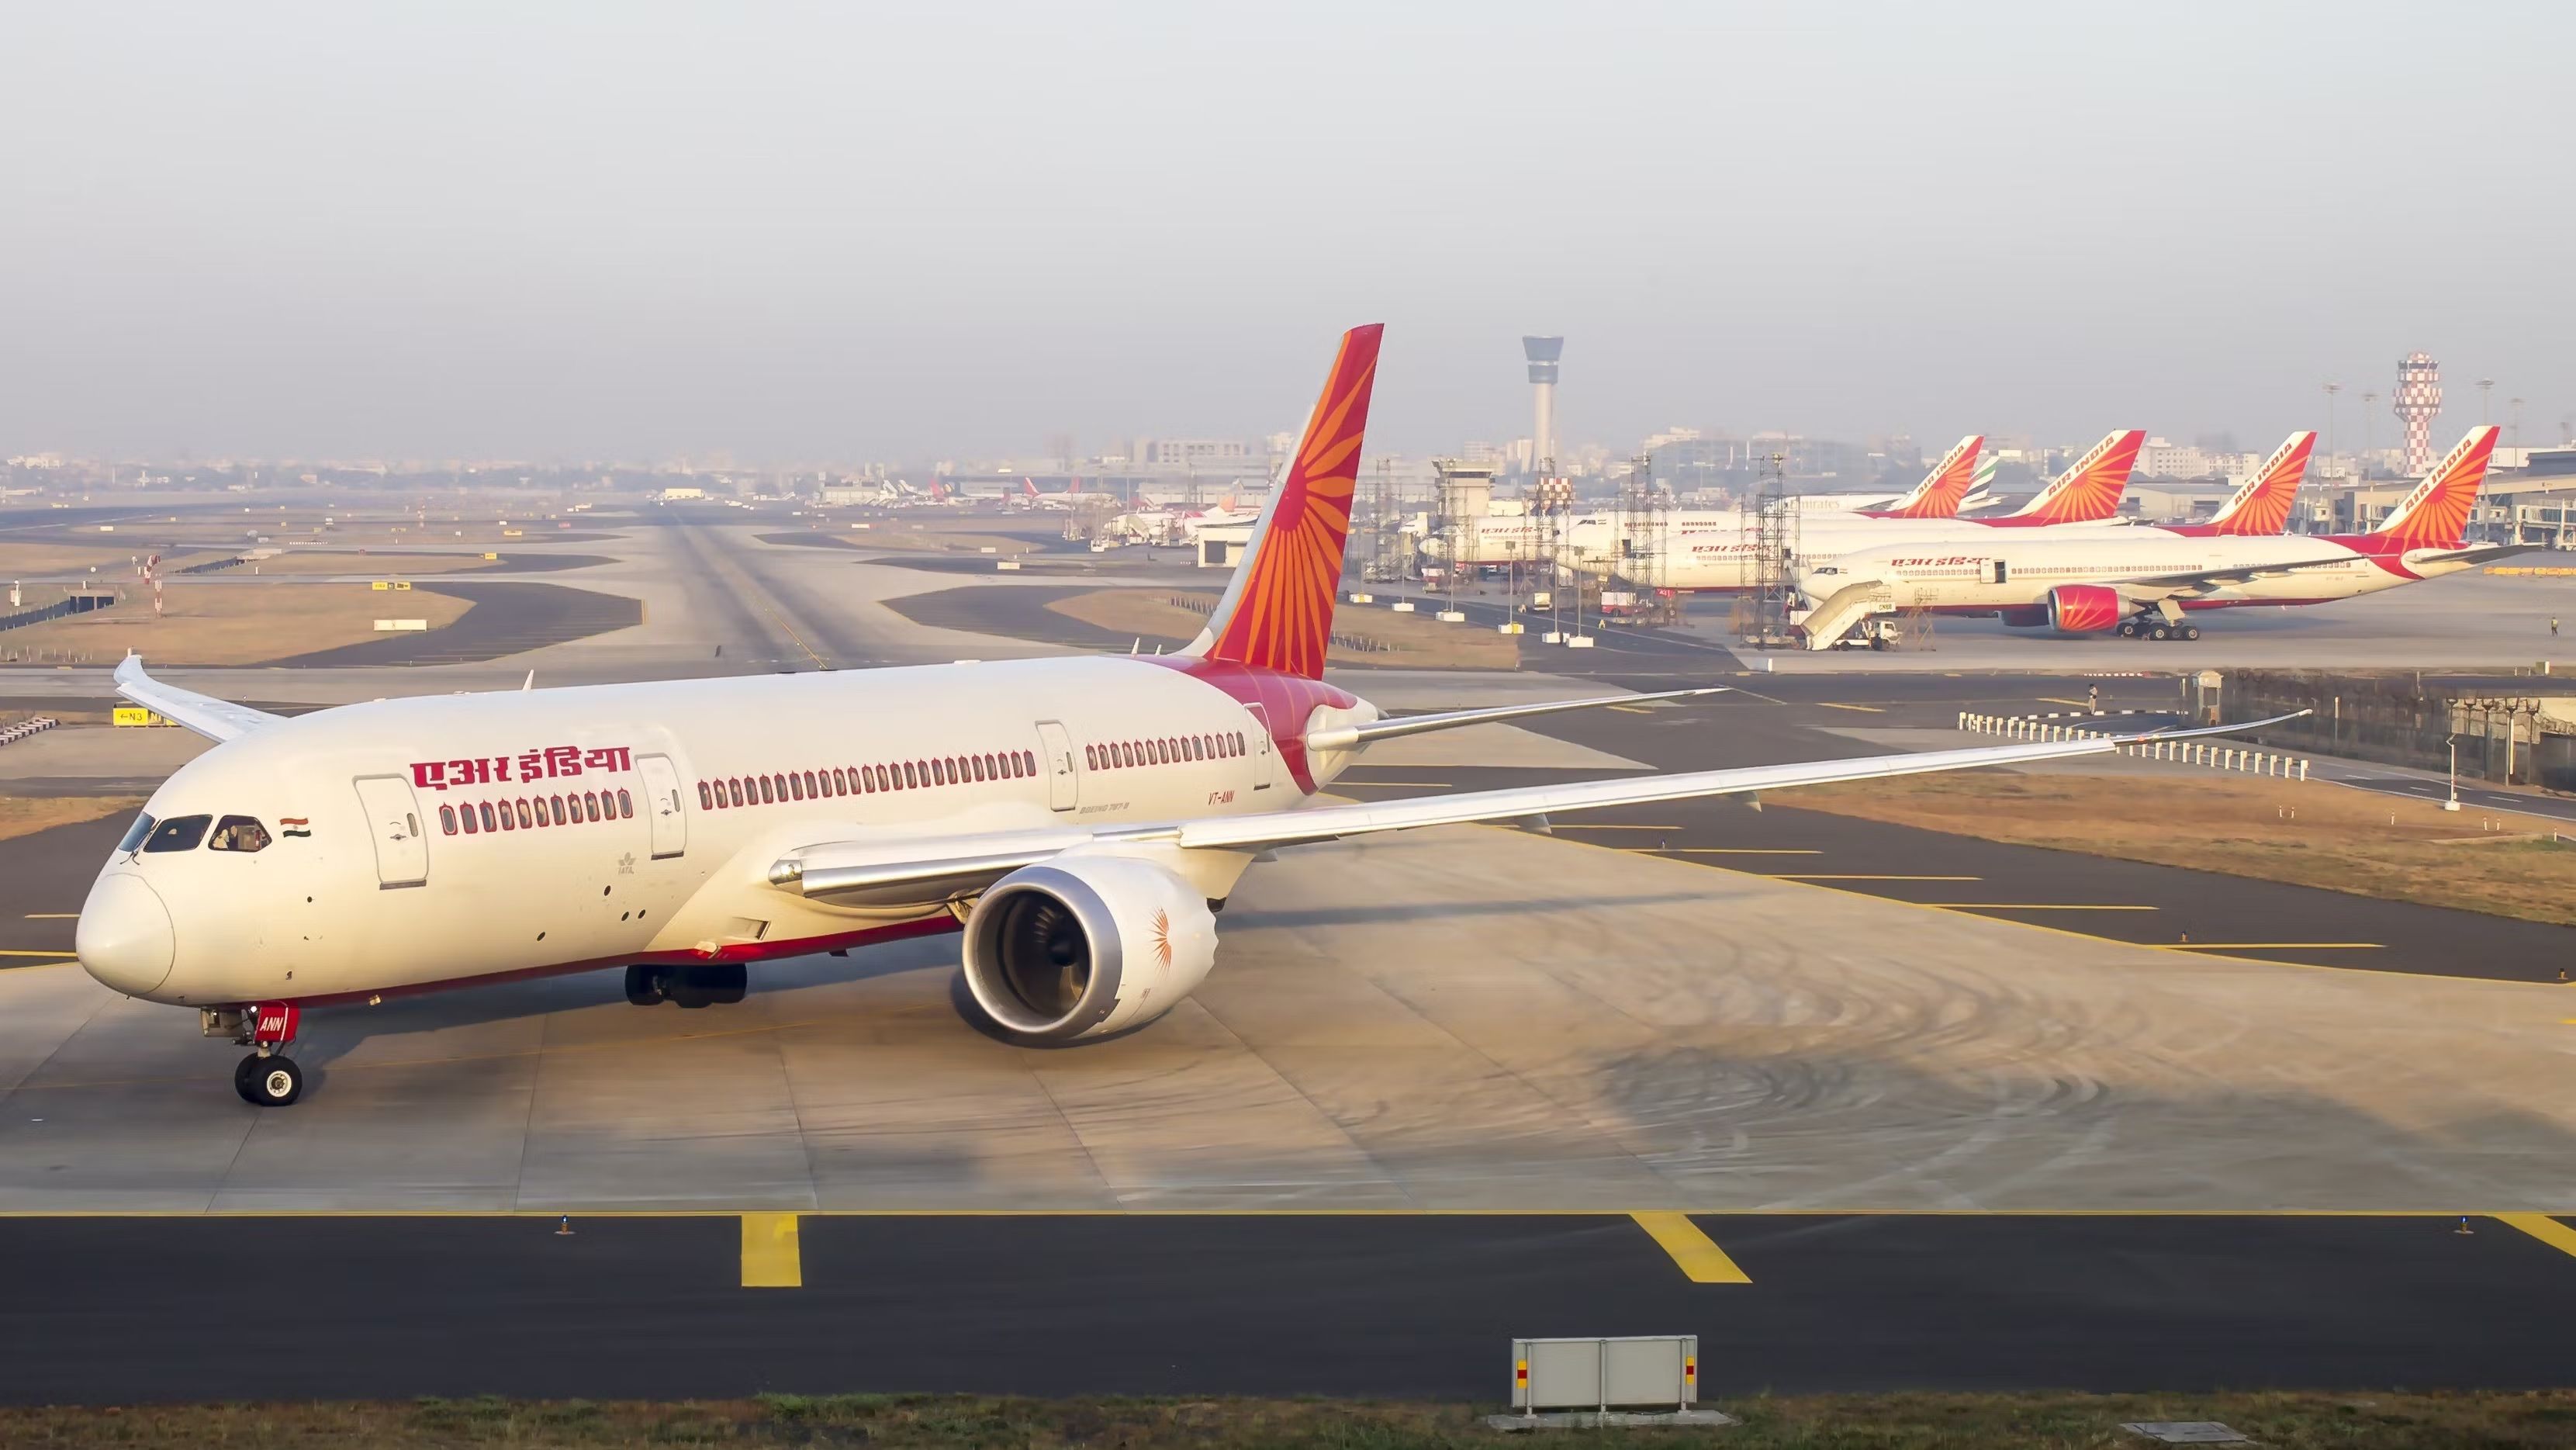 An Air India Boeing 787 at the end of a taxiway.